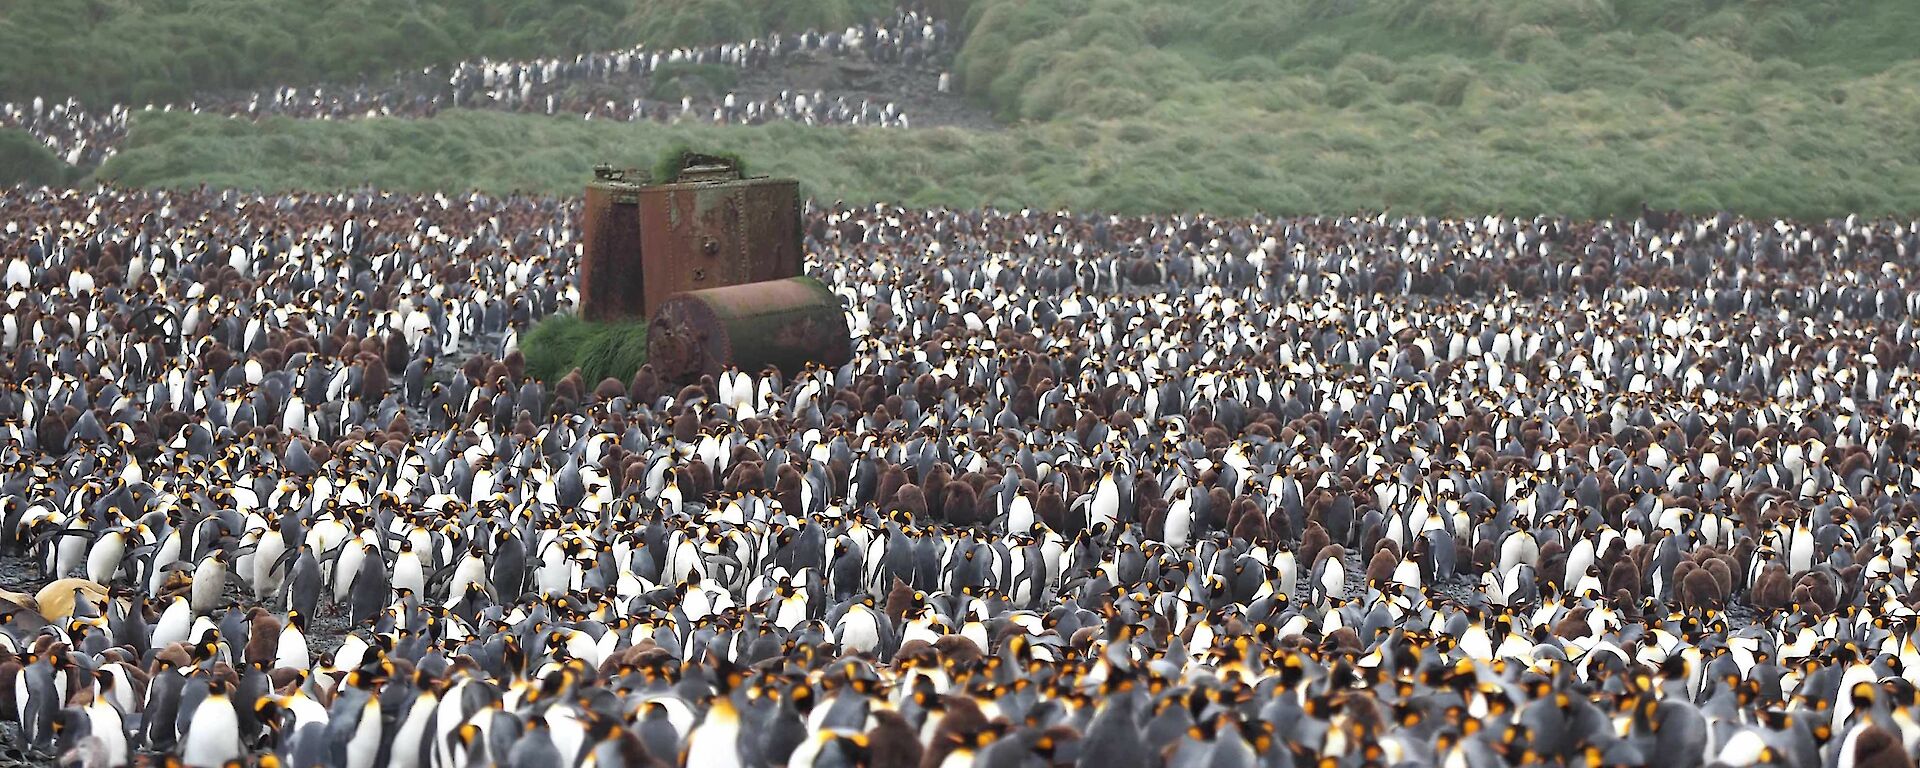 Thousands of king penguins surround a rusted metal structure on a beach